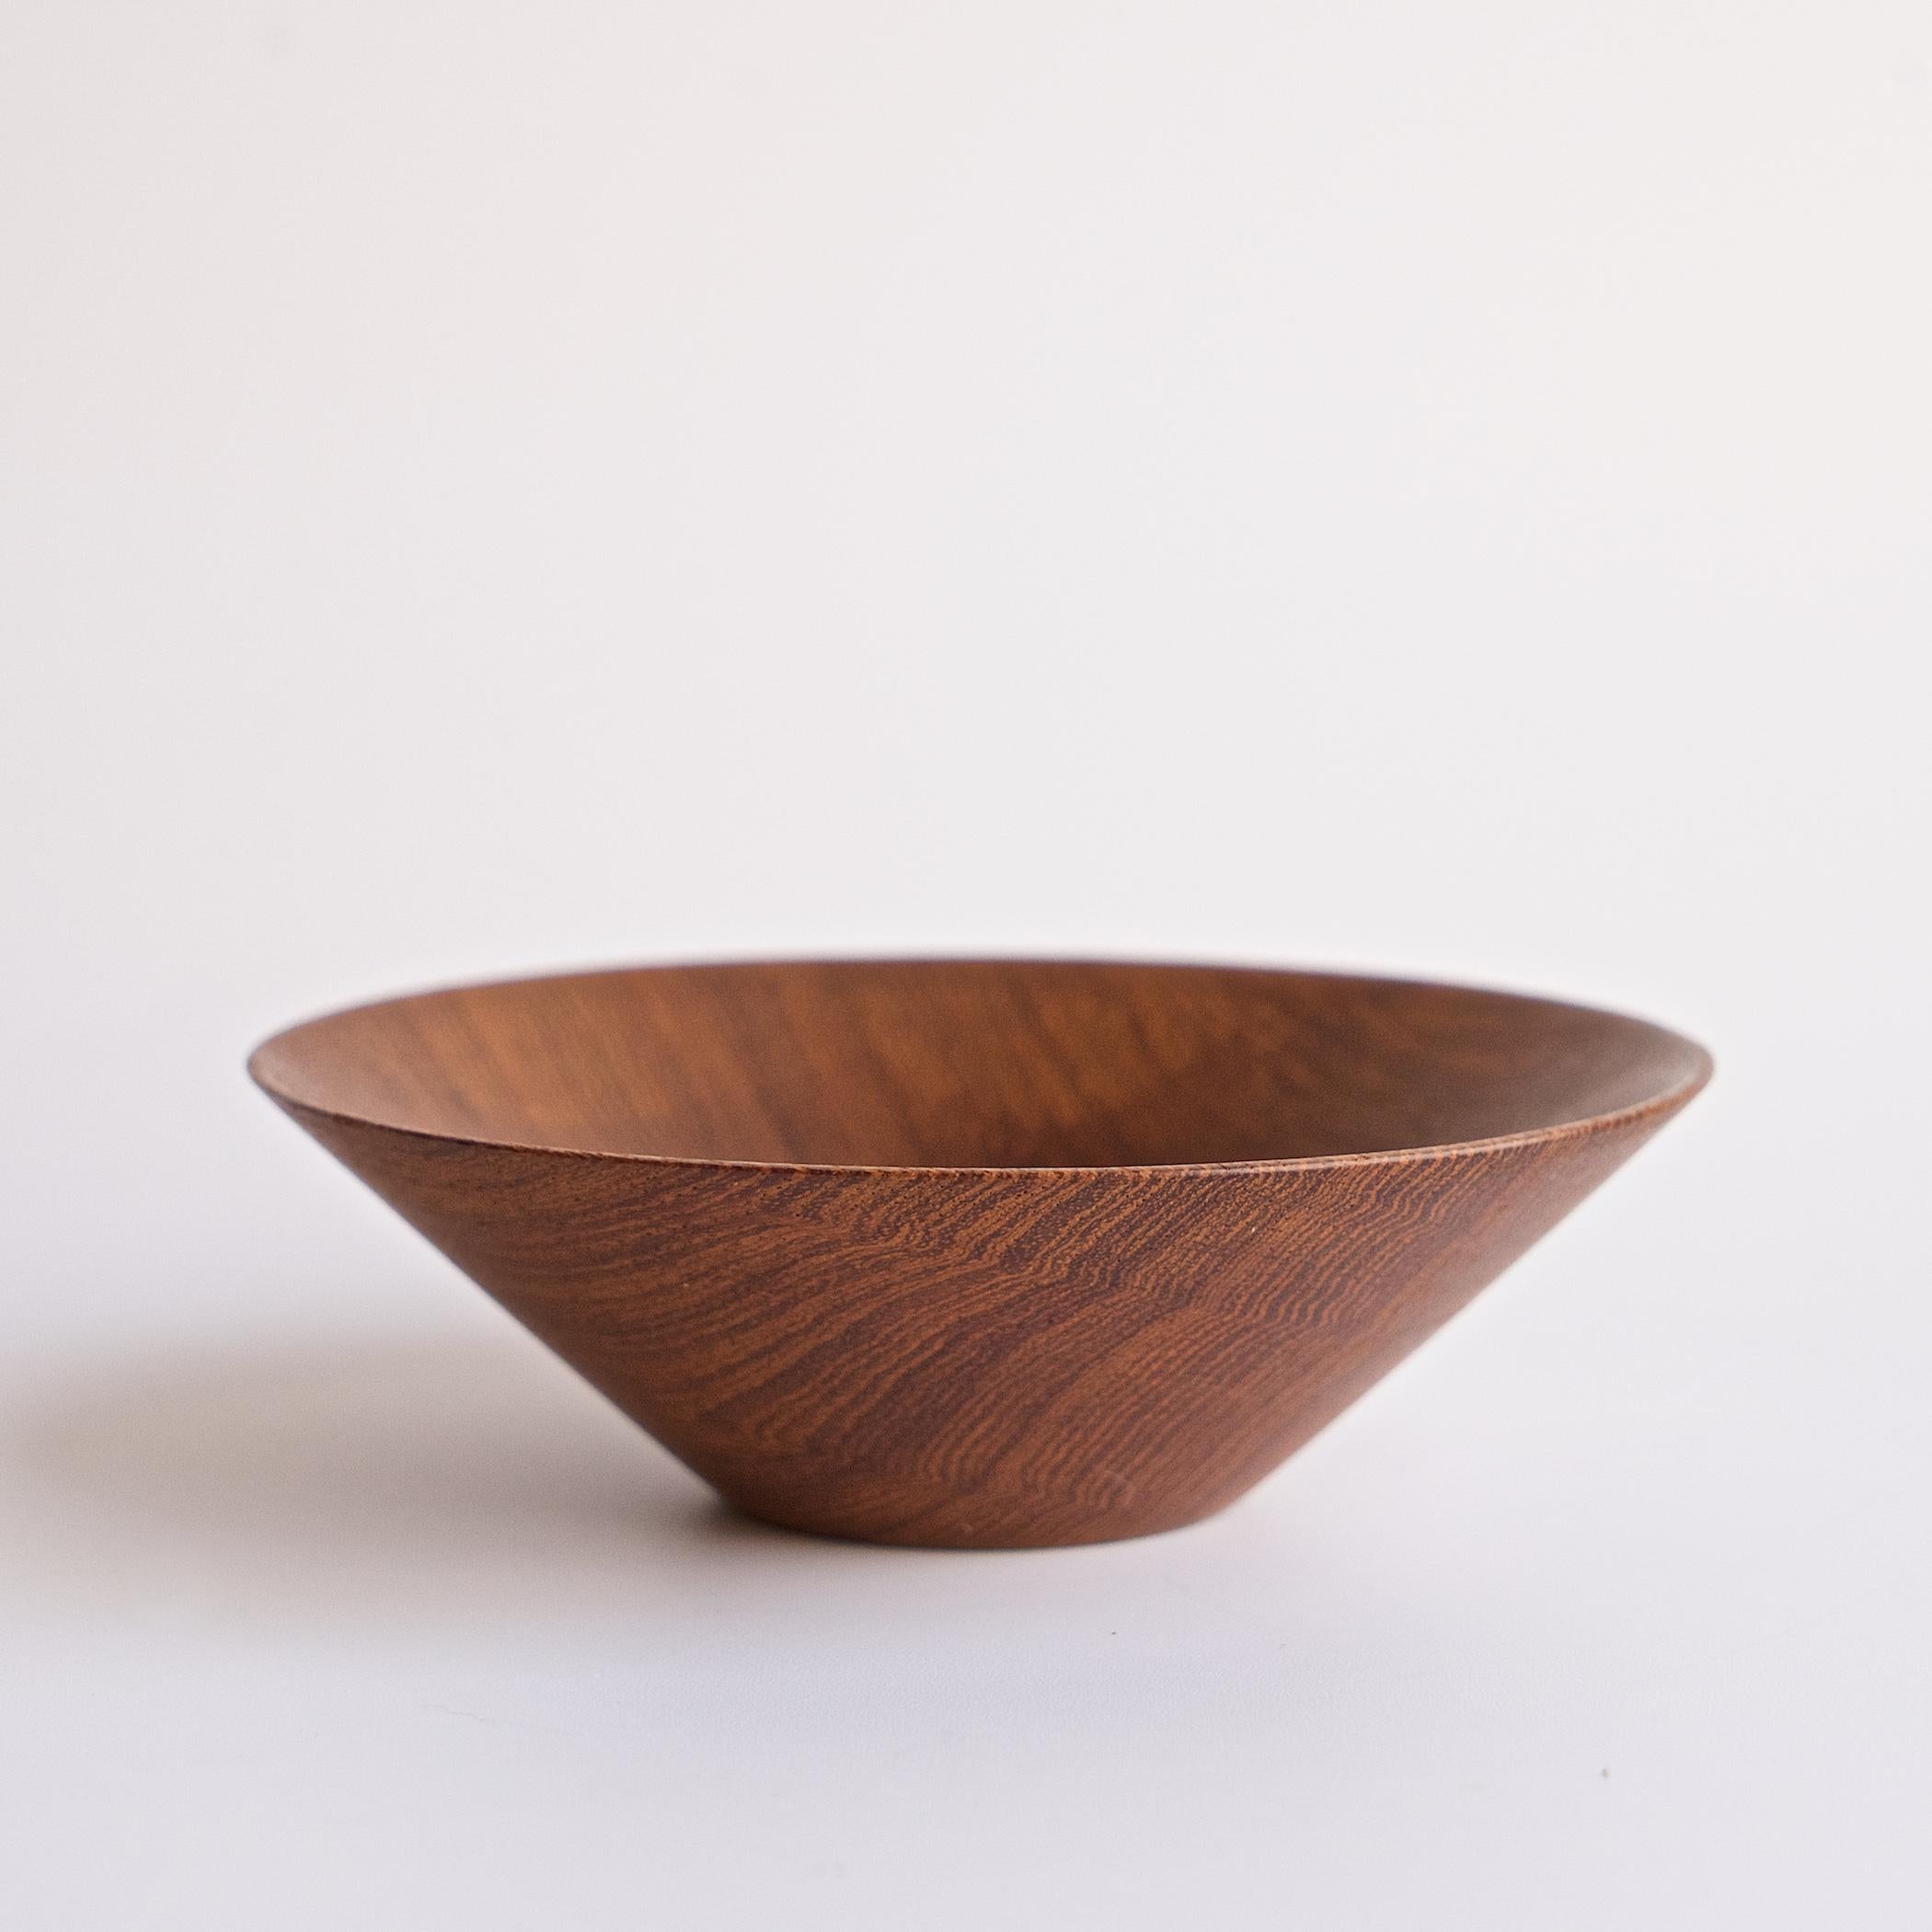 1960s Japanese Modernist Small Bowl Shigemichi Aomine National Craft Council NCC In Good Condition For Sale In Hyattsville, MD